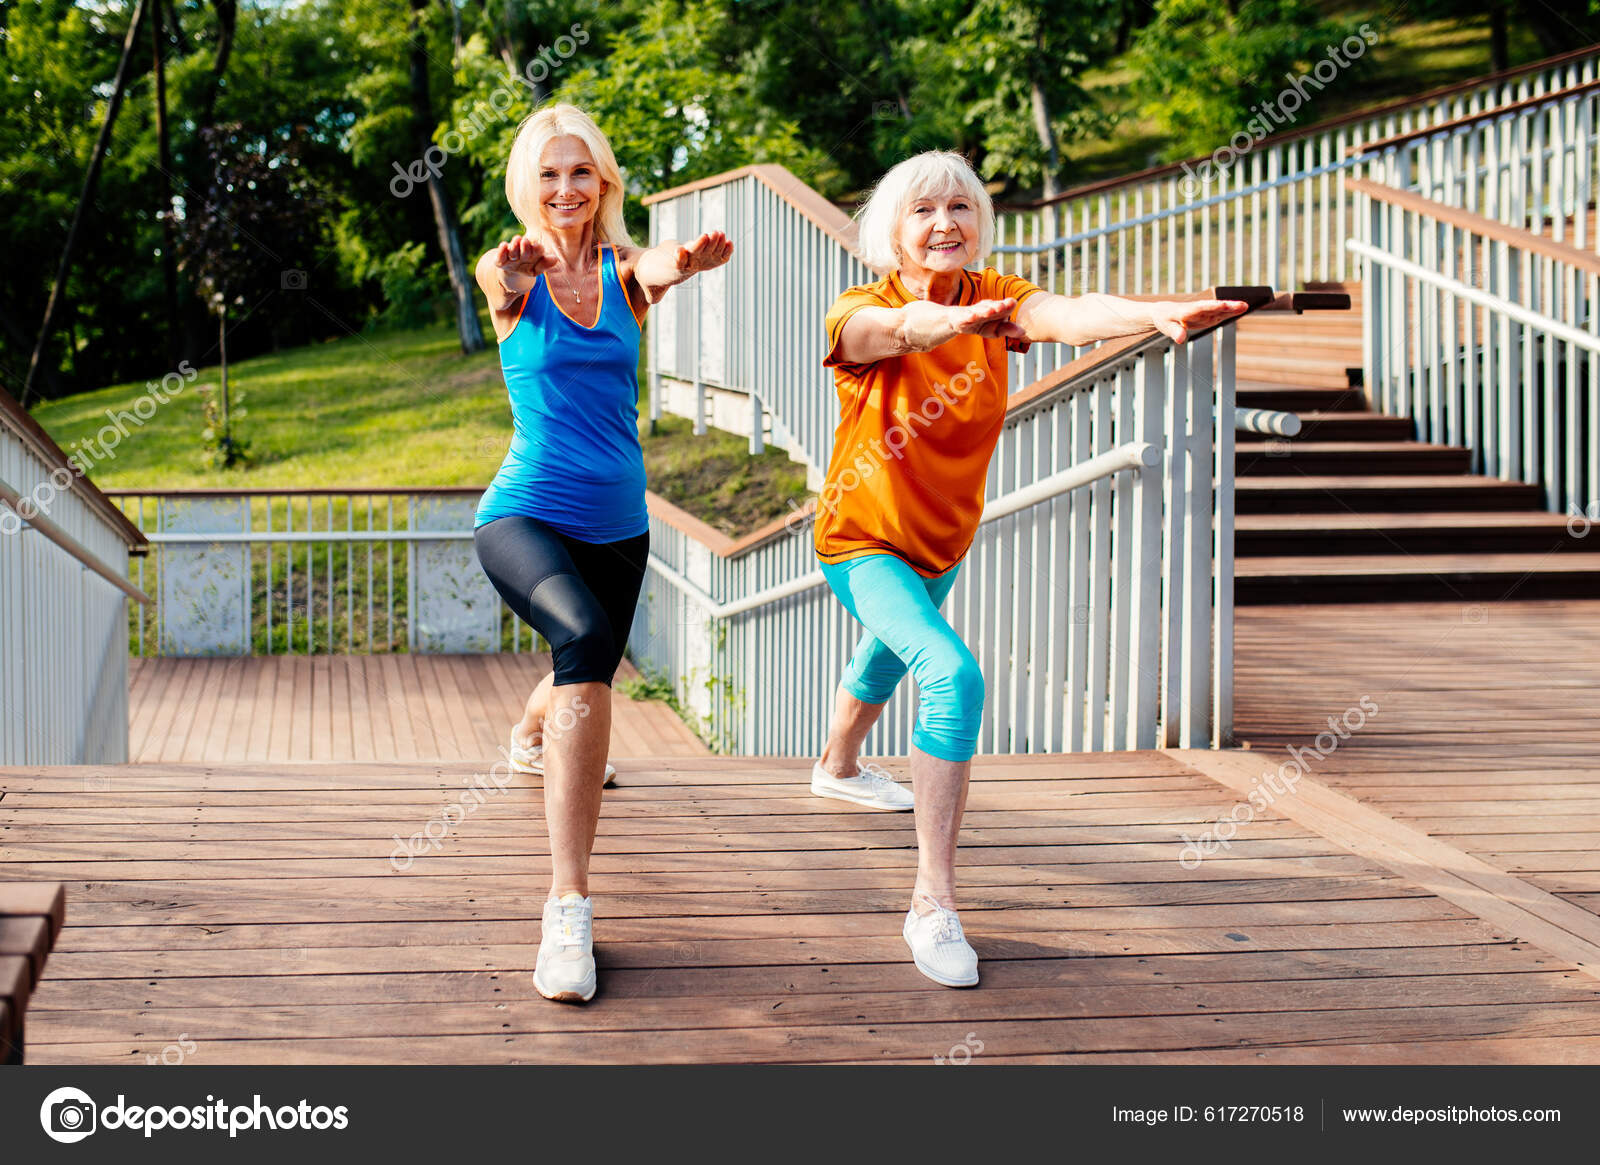 Beautiful Athletic Women Excercises In A Park Stock Photo, Picture